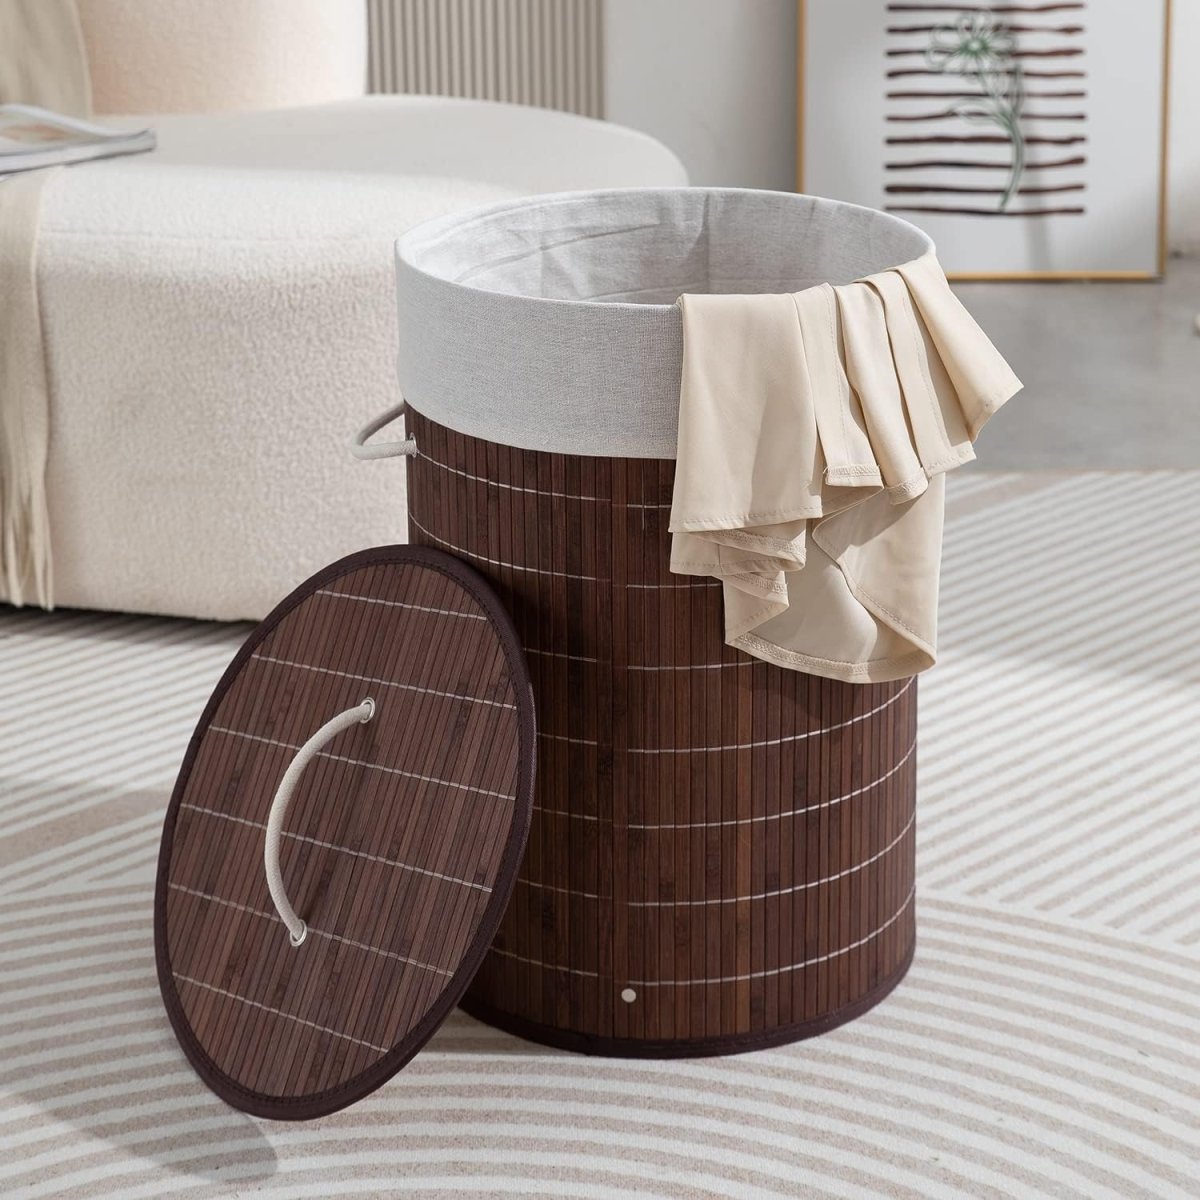 Round Bamboo Laundry Basket With Lid (35CM*60CM) Laundry Bag- #Royalkart#brown lid basket